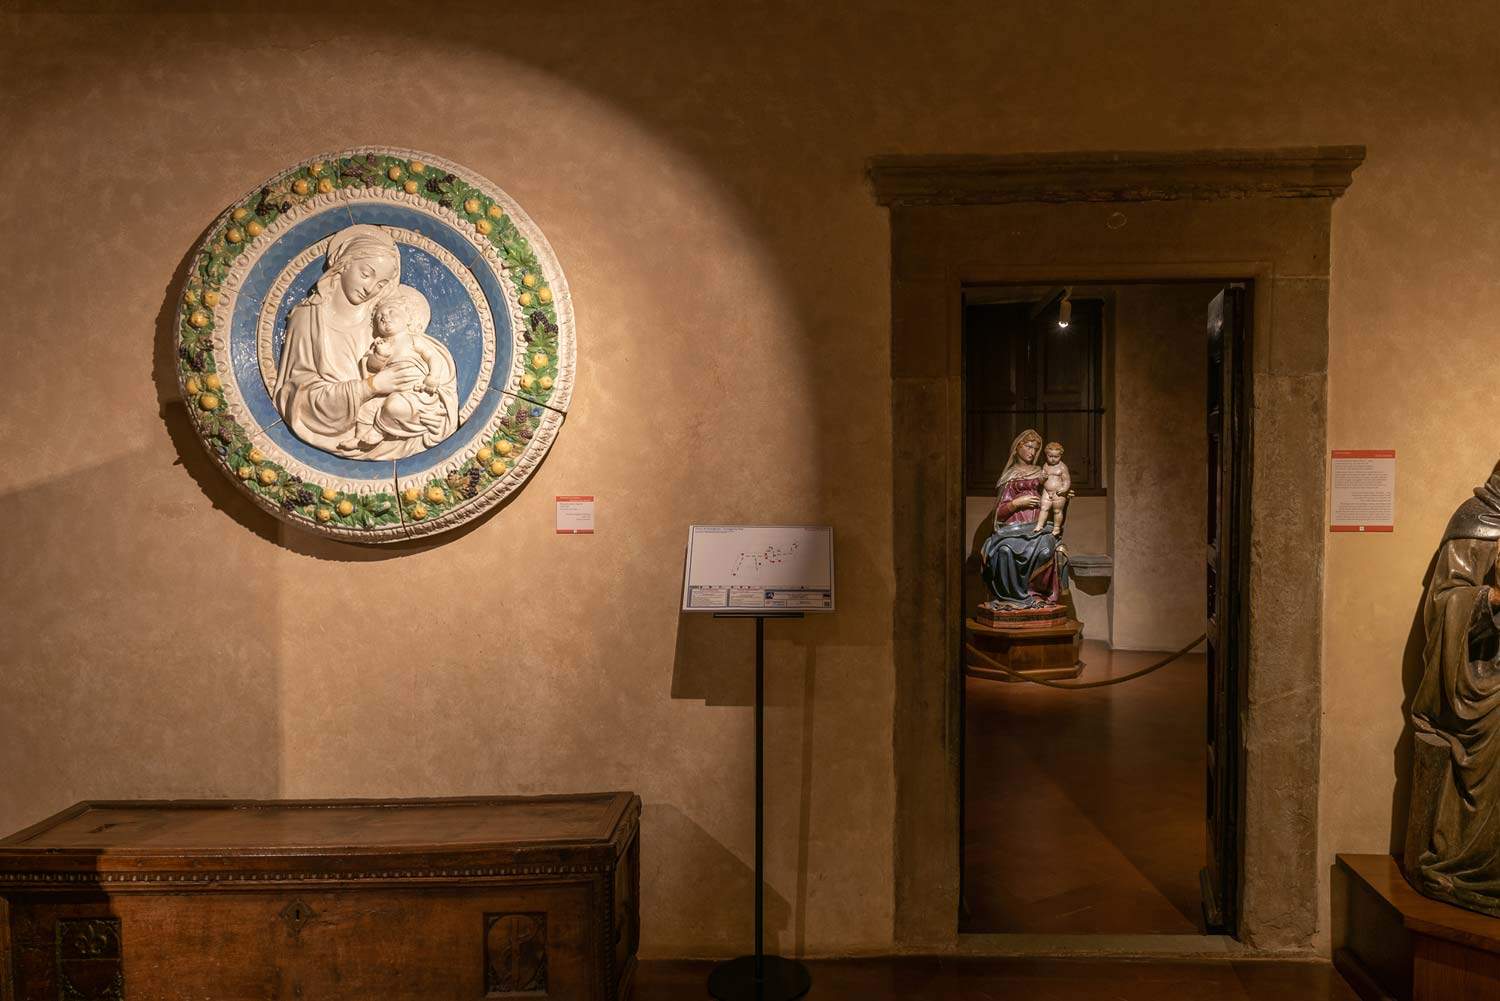 Anghiari, an exhibition on women with medieval and Renaissance works